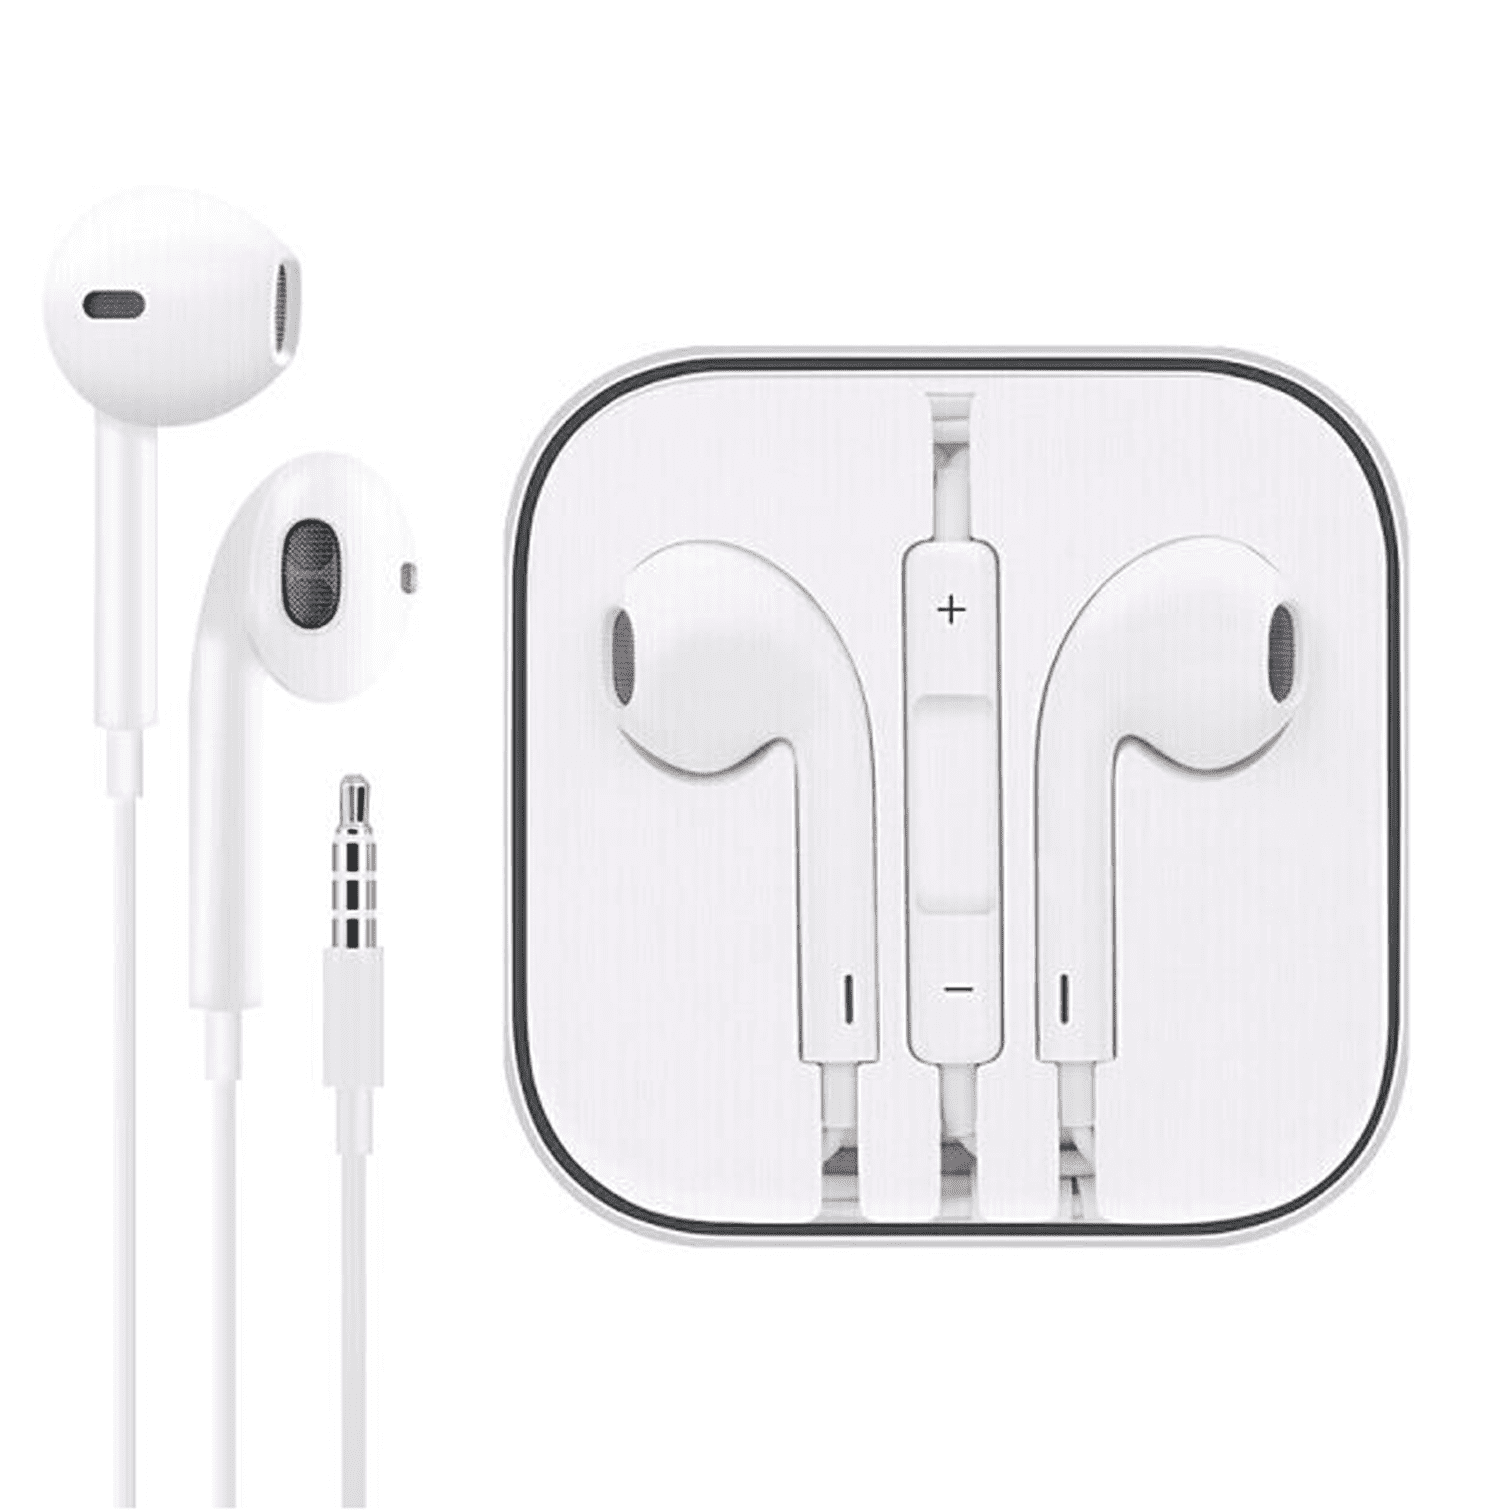 teenagere Byg op lade som om 3.5mm Headphones, In-Ear EarBuds for Apple iPhone 6 6S 5S 5 SE 4S 4 3Gs  iPod Touch 6th 5th 4th 3rd Generation iPad Laptop PC MP3 MP4 In Ear White Headphone  Headset